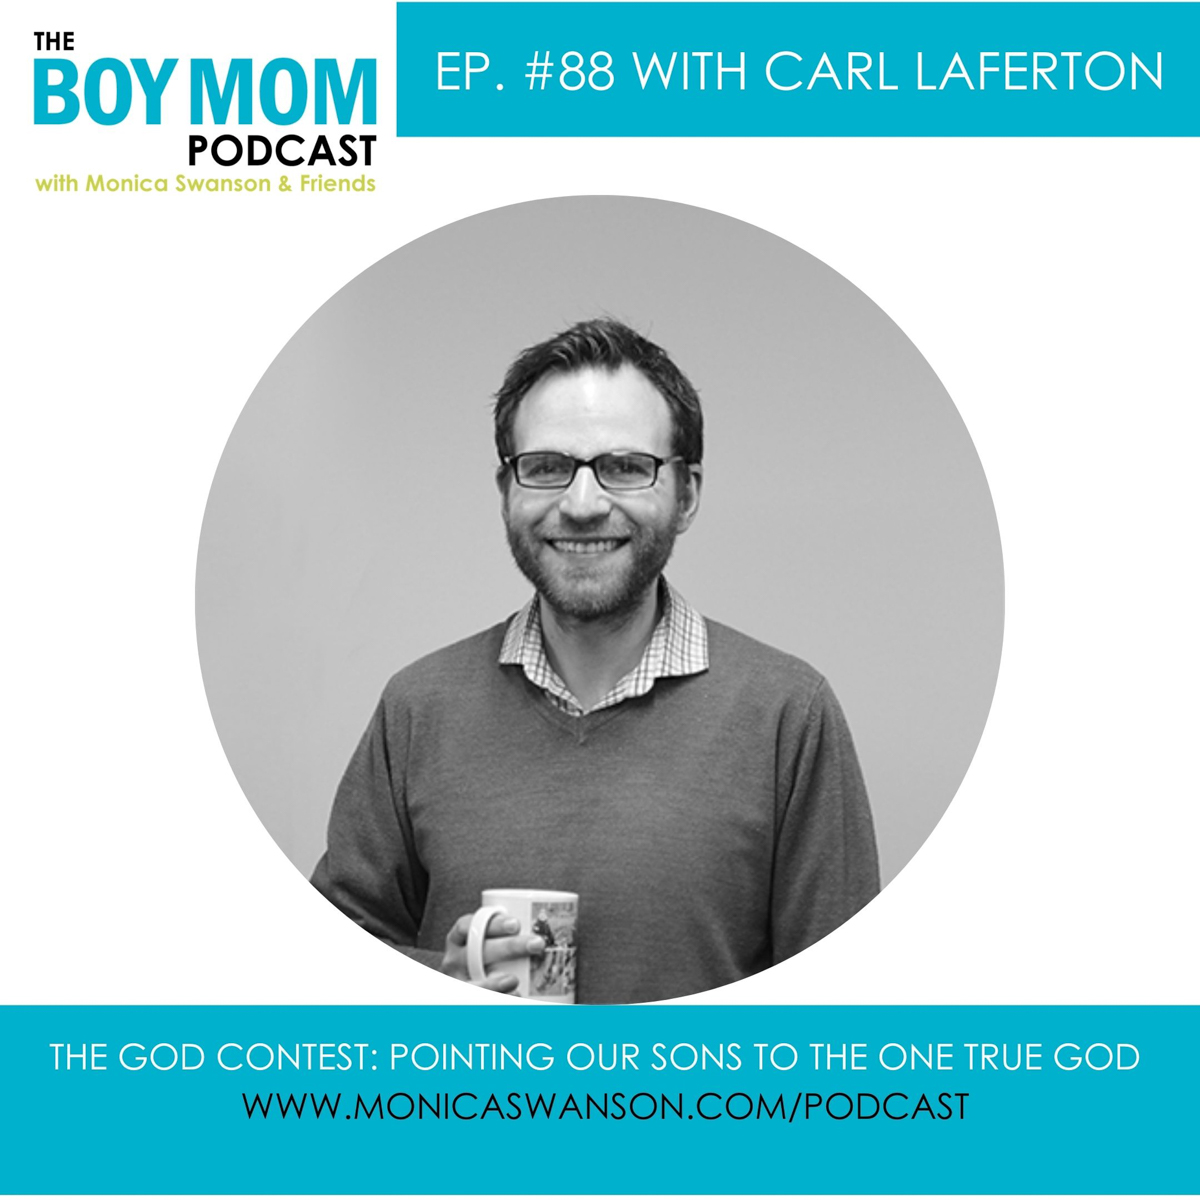 Pointing our Sons to the One True God {Episode 88 with Carl Laferton}